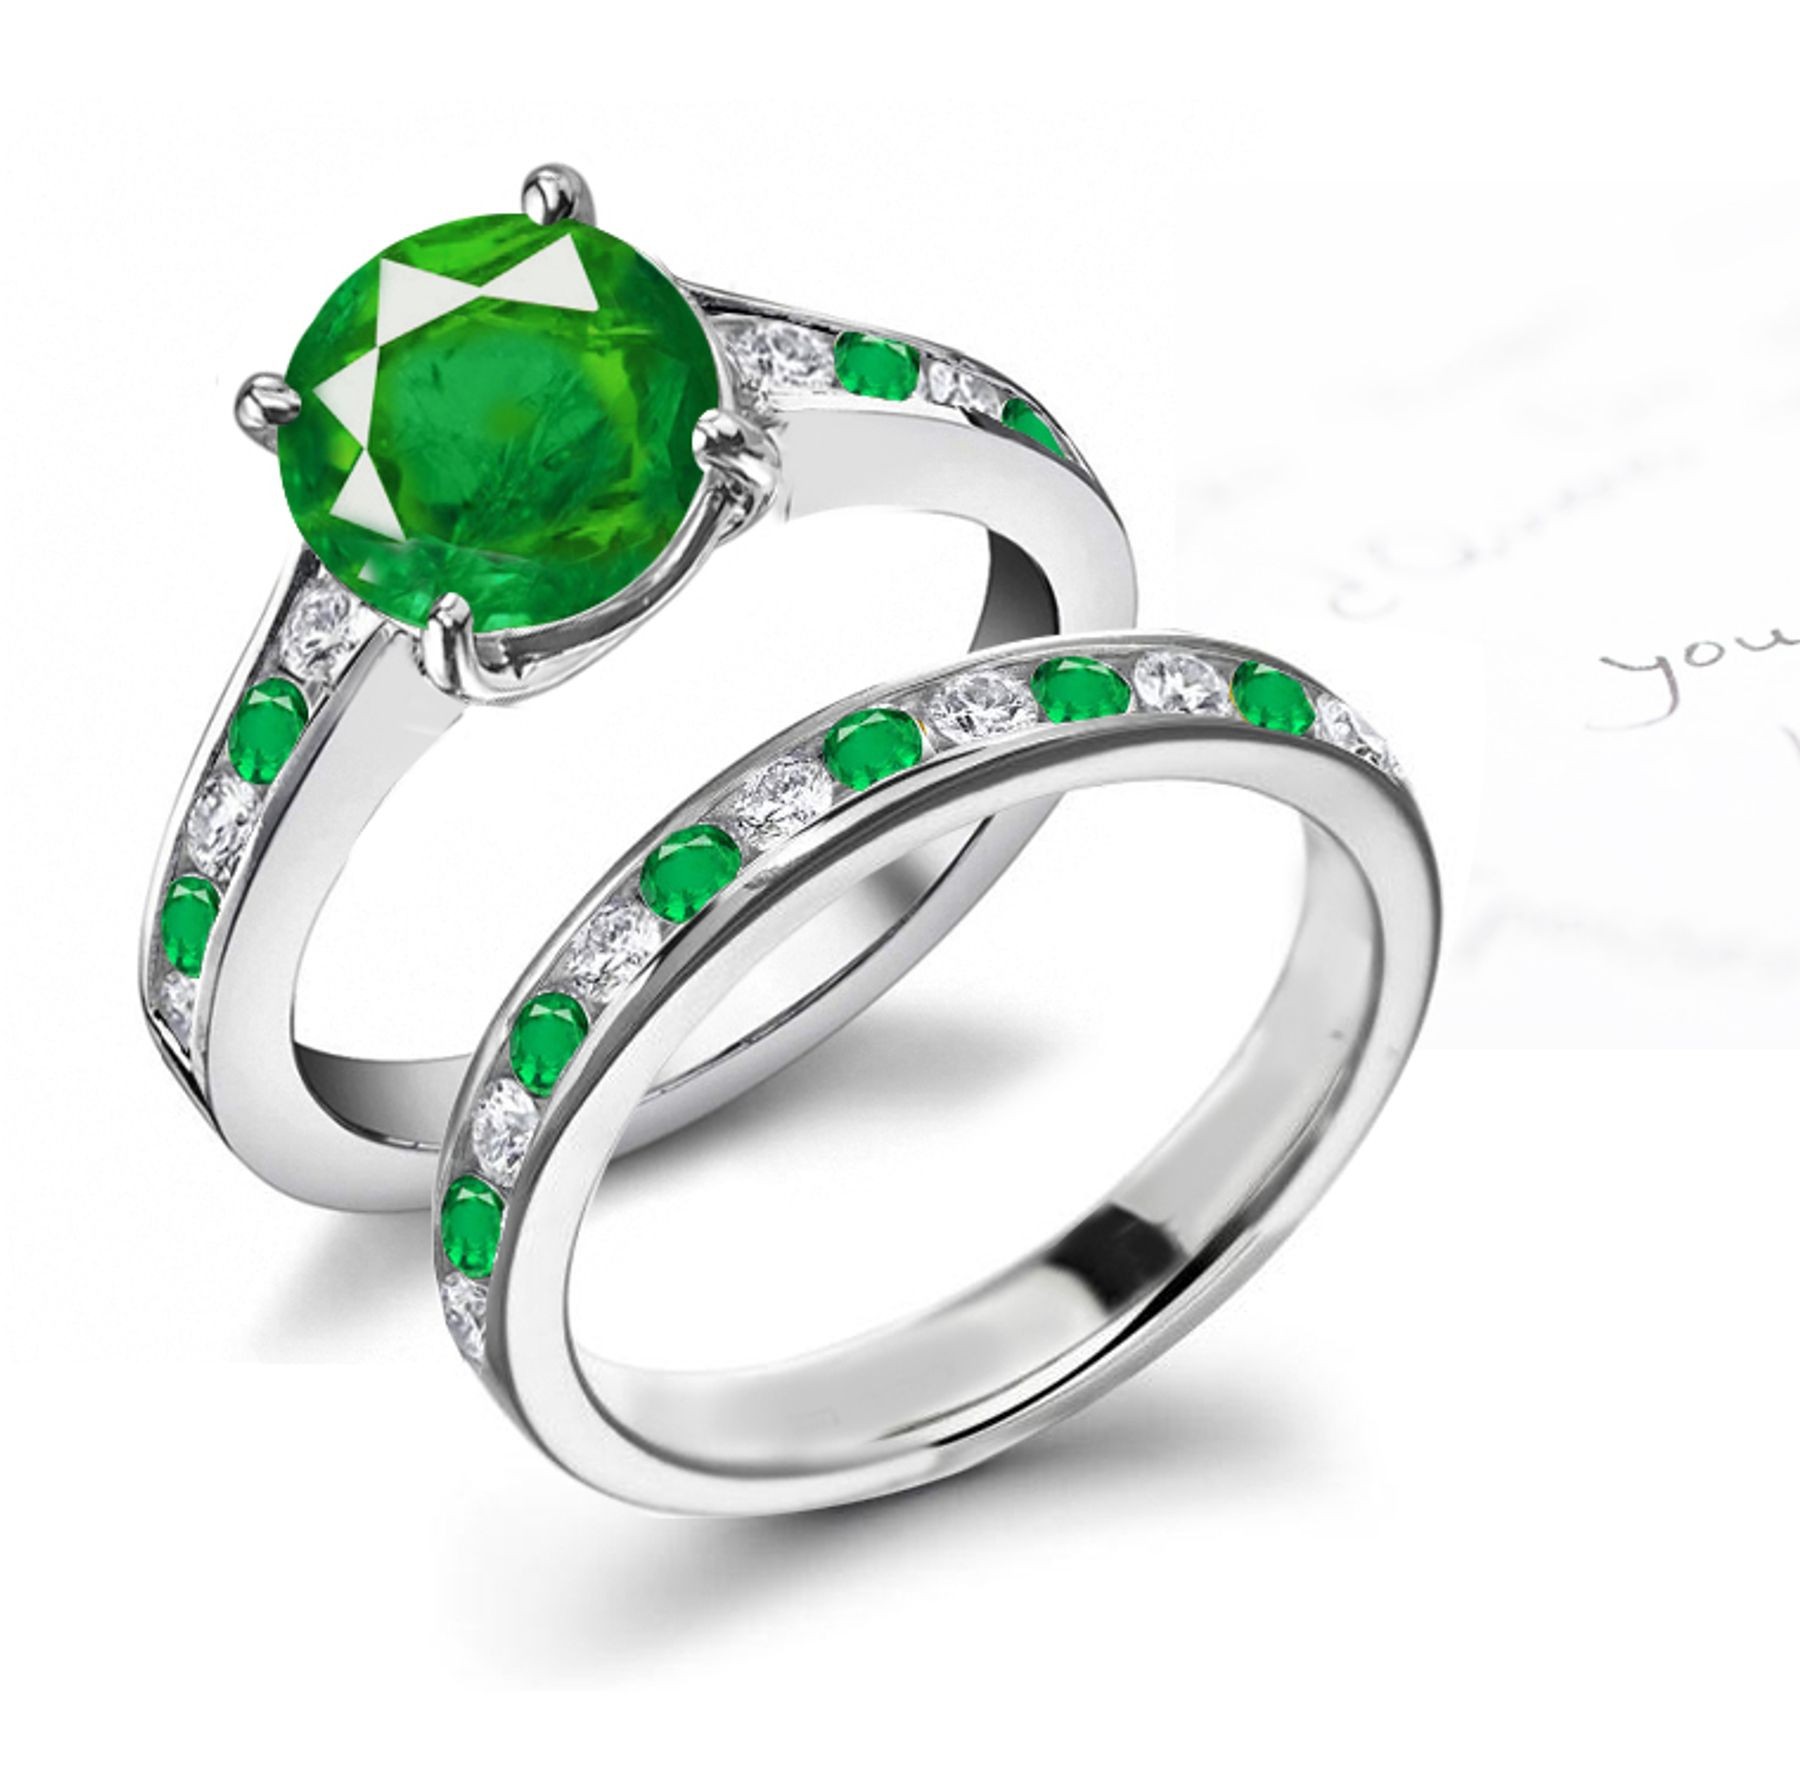 New and Popular Styles: Discover Channel Set Emerald Ring With & Diamondsin 14k White Gold